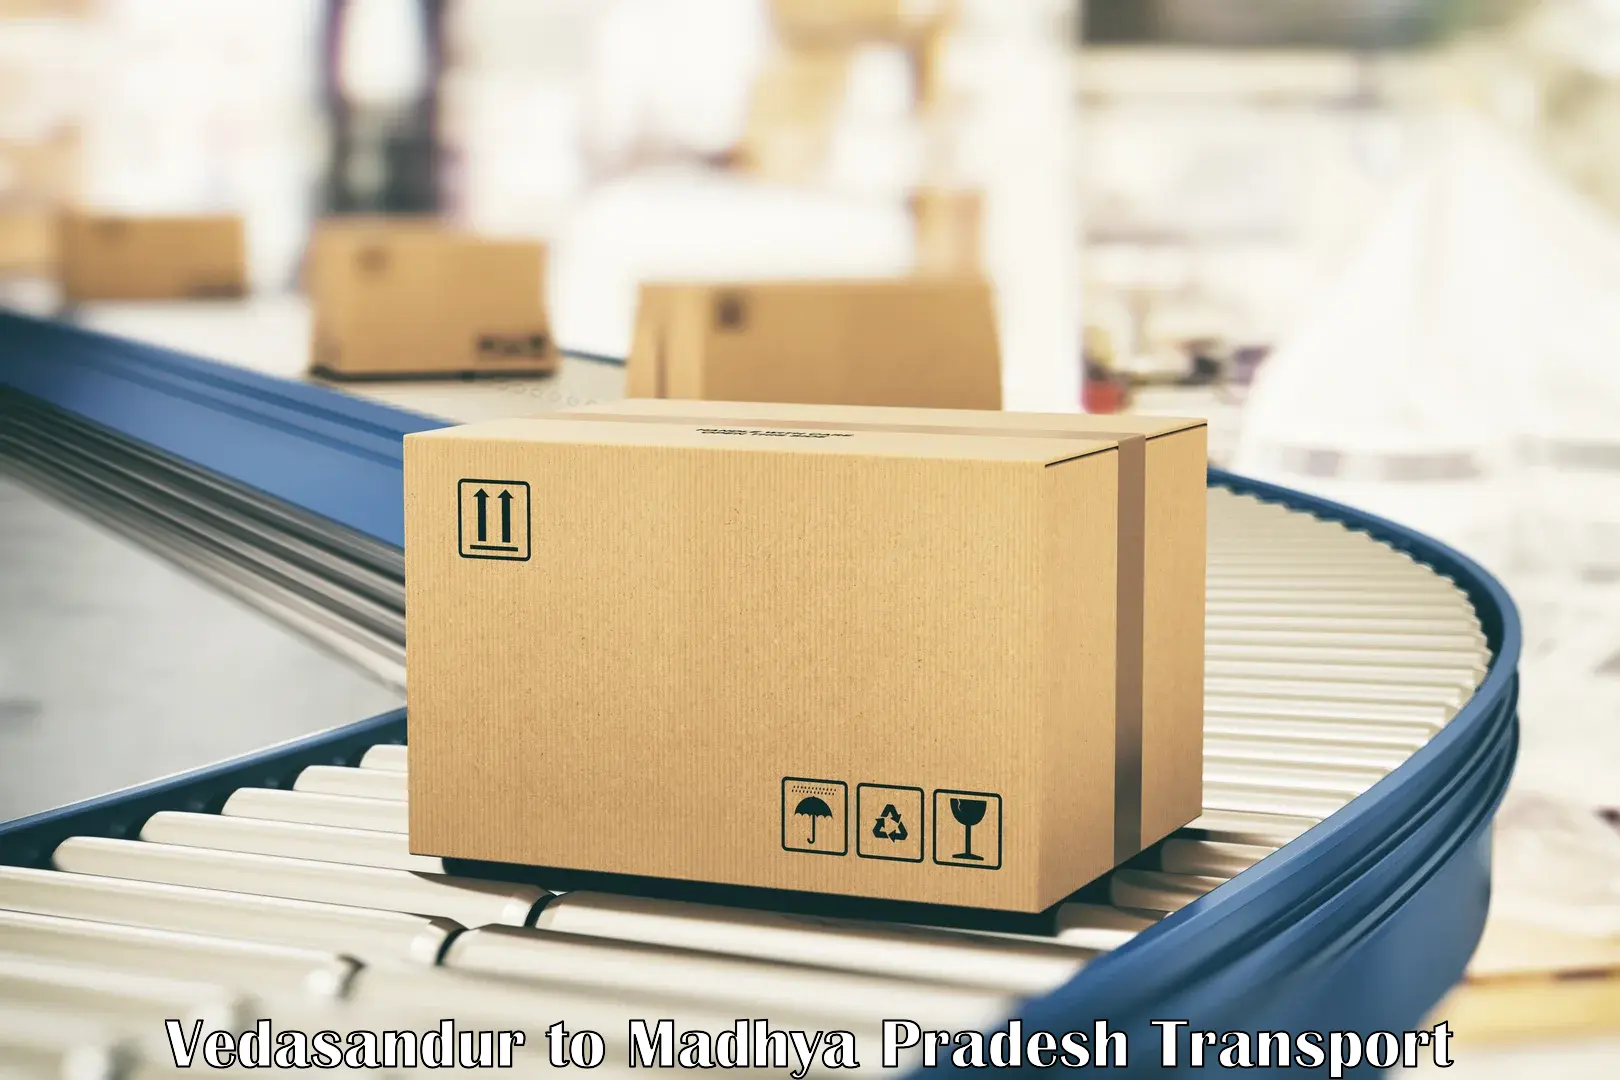 Domestic goods transportation services in Vedasandur to BHEL Bhopal